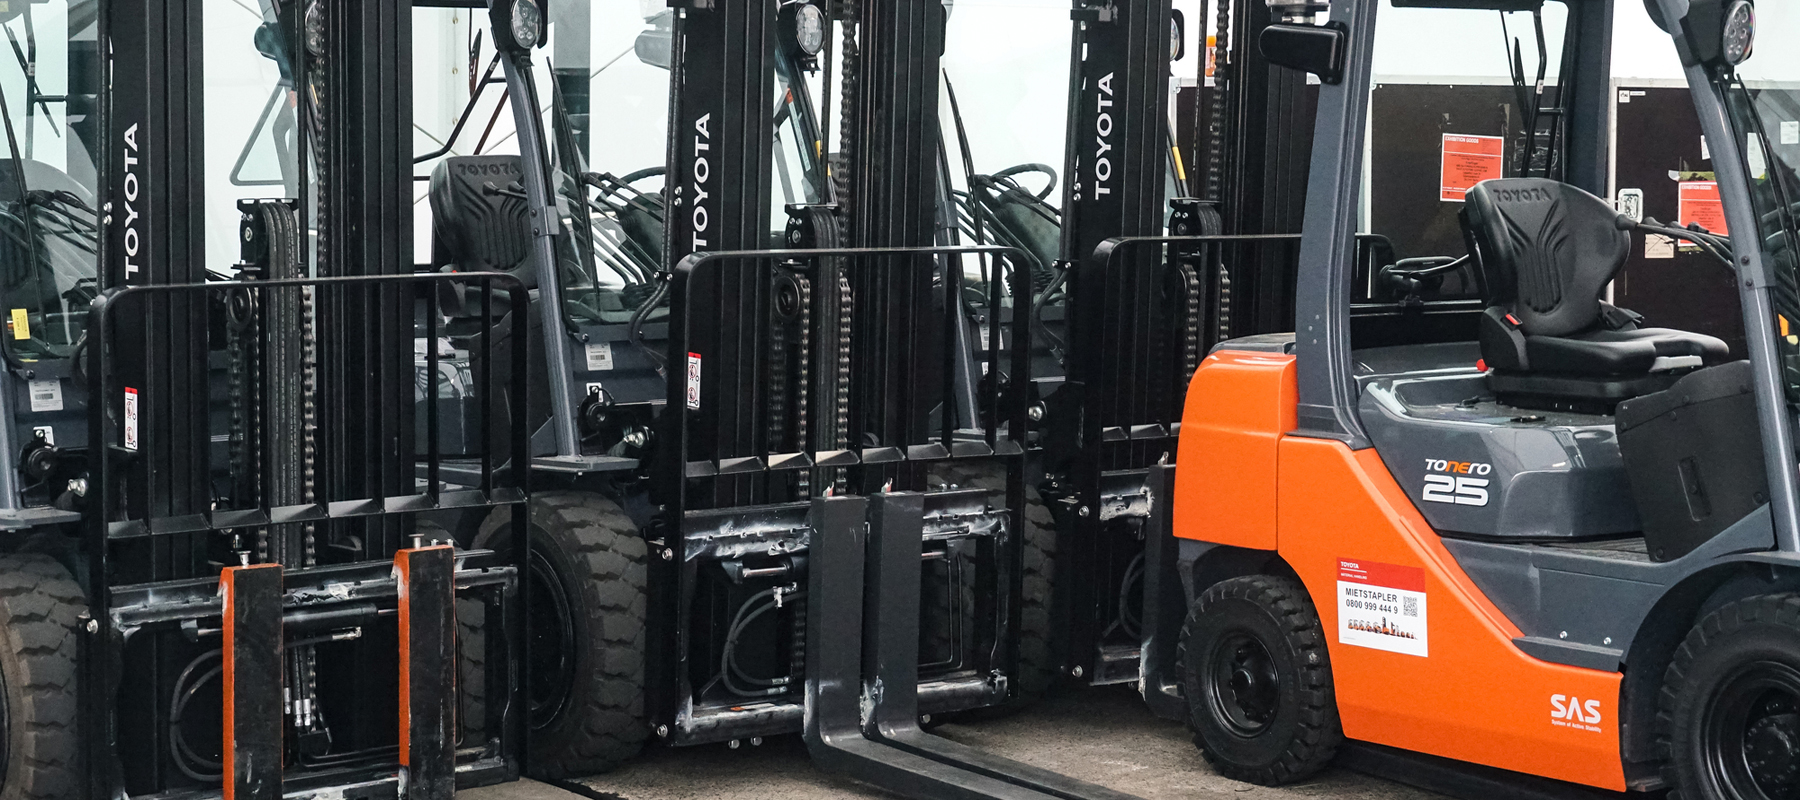 Toyota Forklifts in a Row